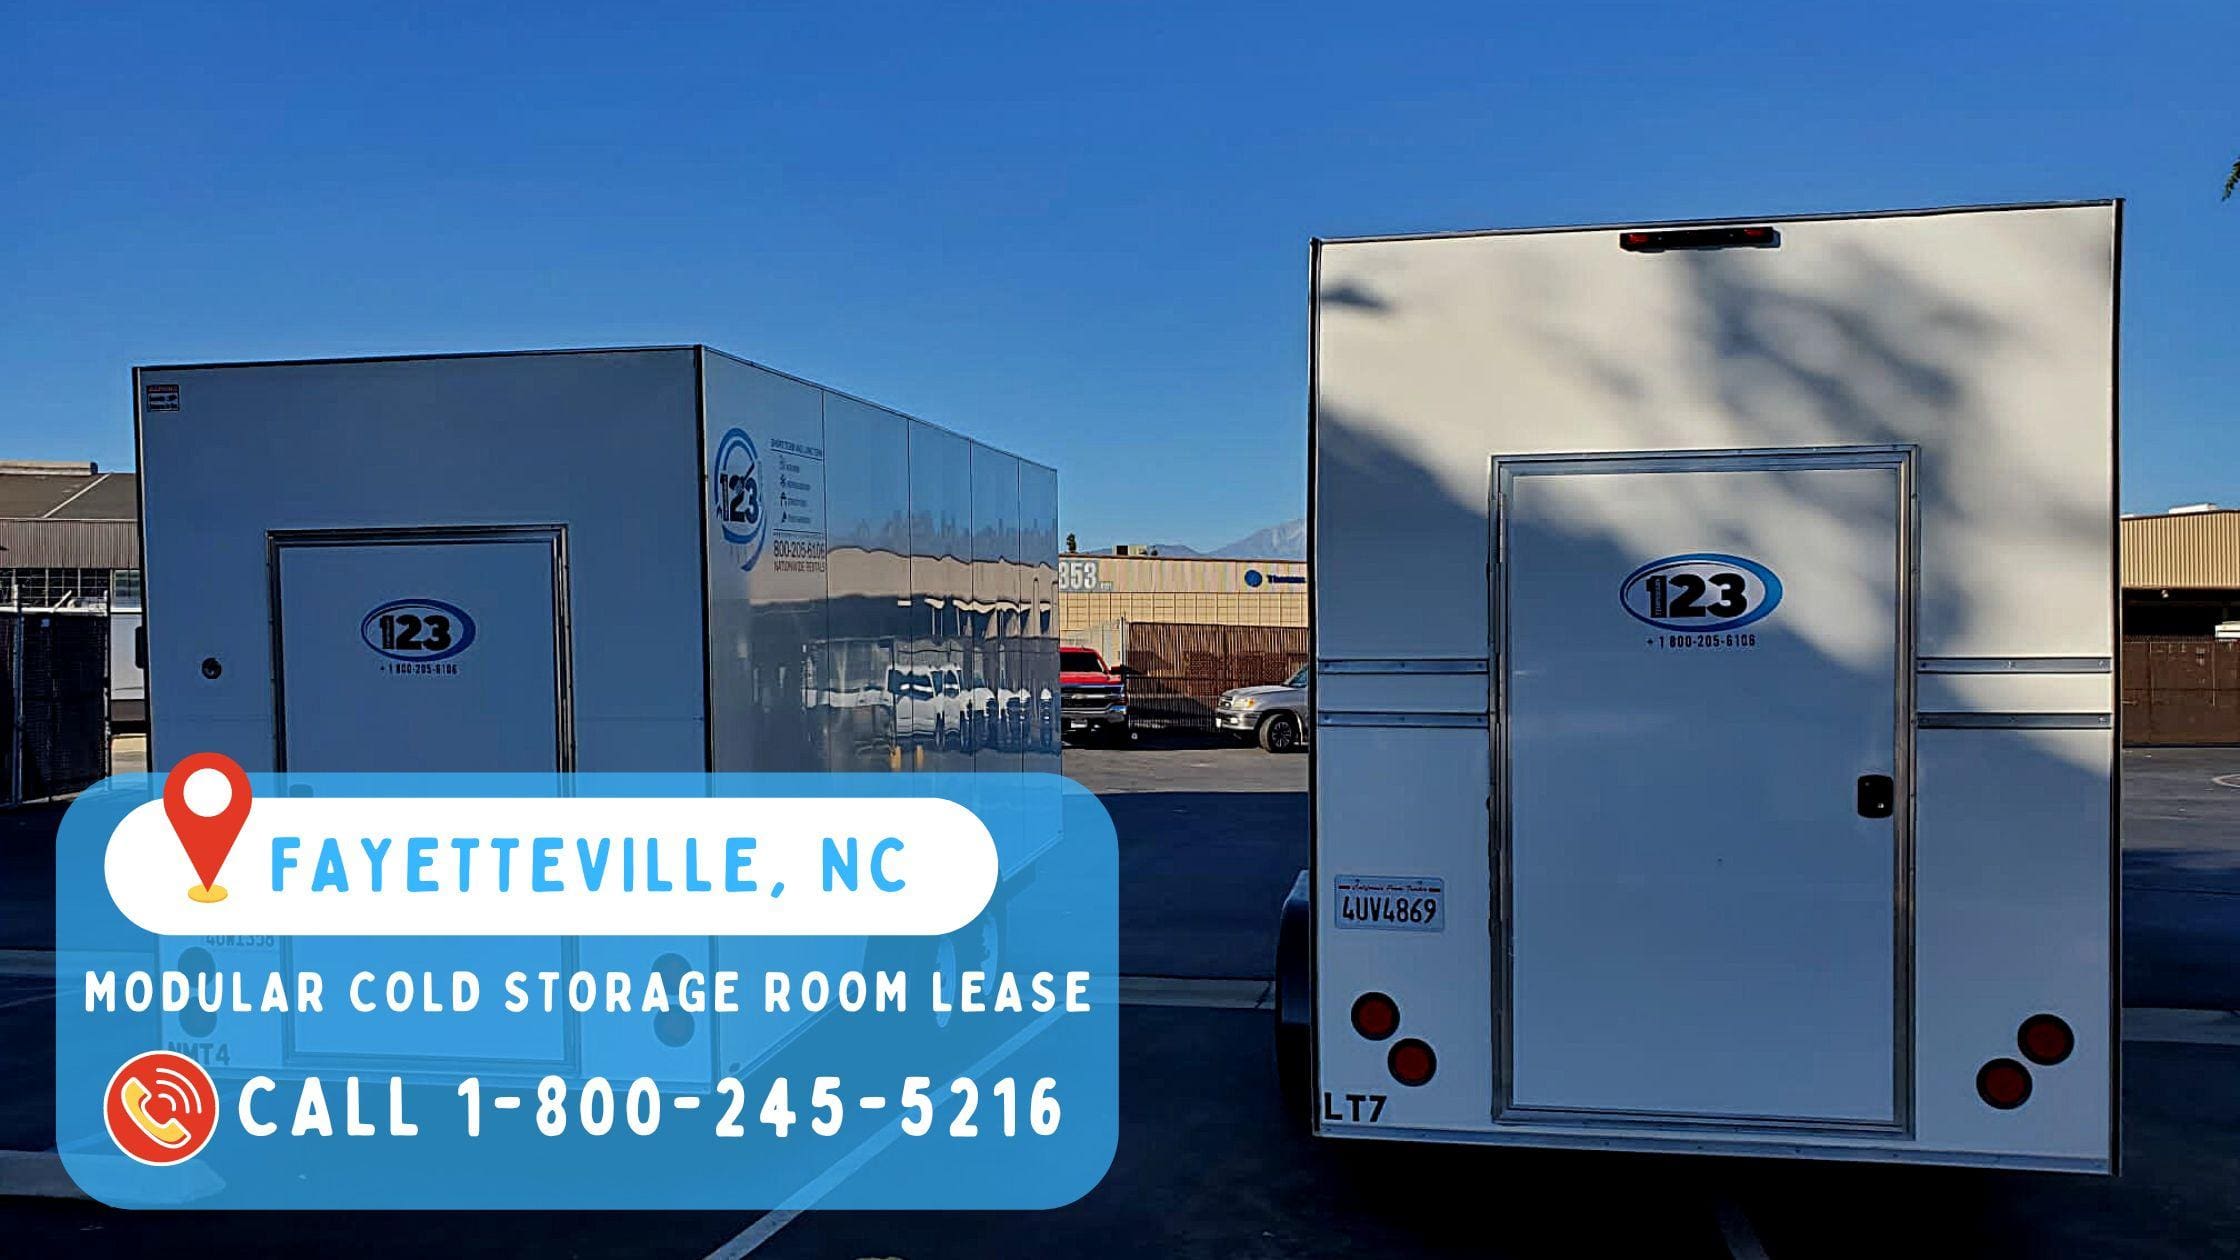 Modular Cold Storage Room Lease in Fayetteville